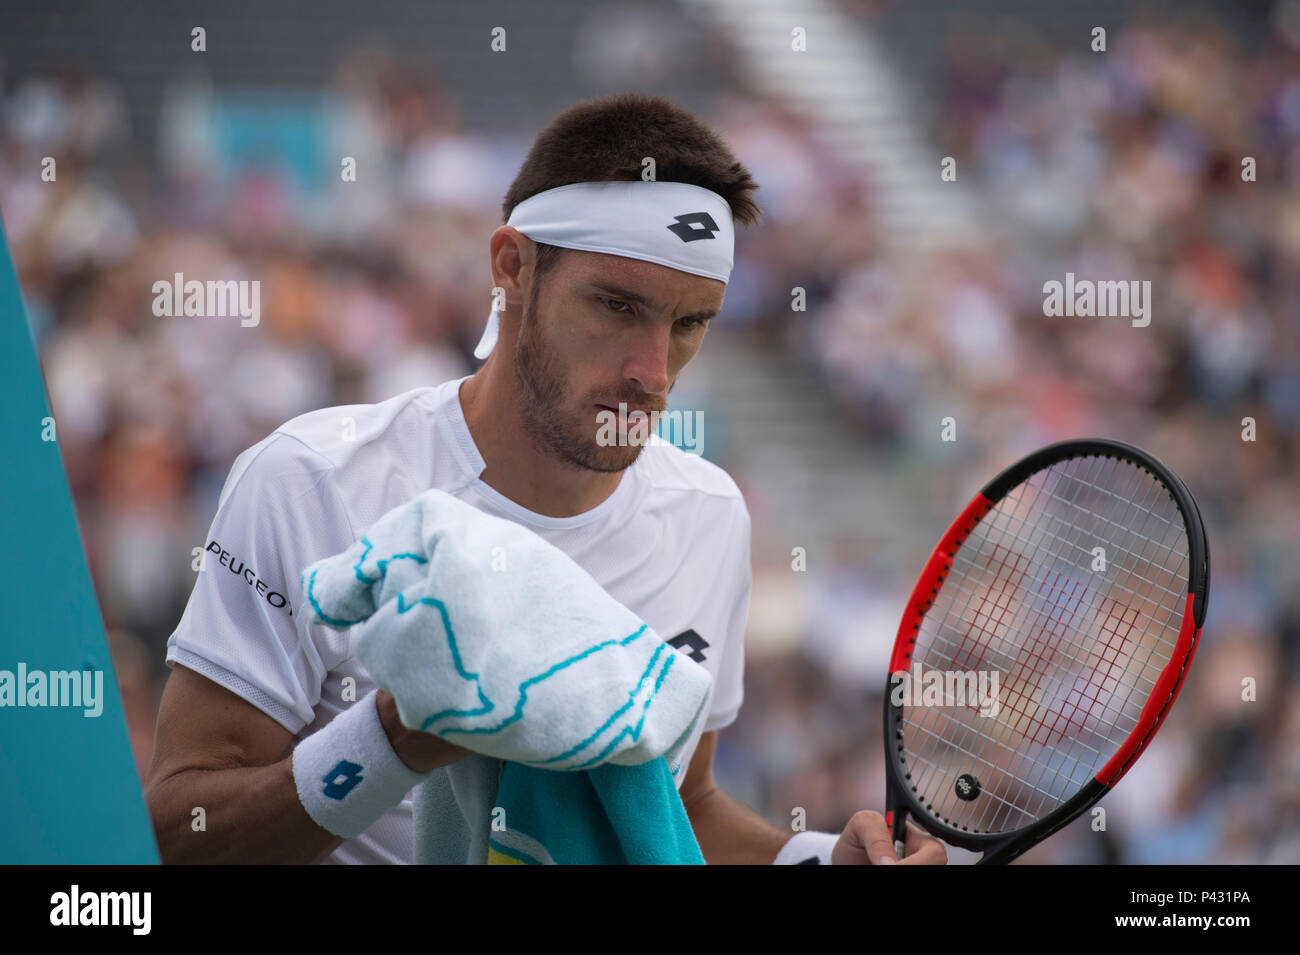 The Queen’s Club, London, UK. 20 June, 2018. Day 3 of the Fever Tree Championships on centre court with Leonardo Mayer (ARG) in action against Frances Tiafoe (USA). Credit: Malcolm Park/Alamy Live News. Stock Photo